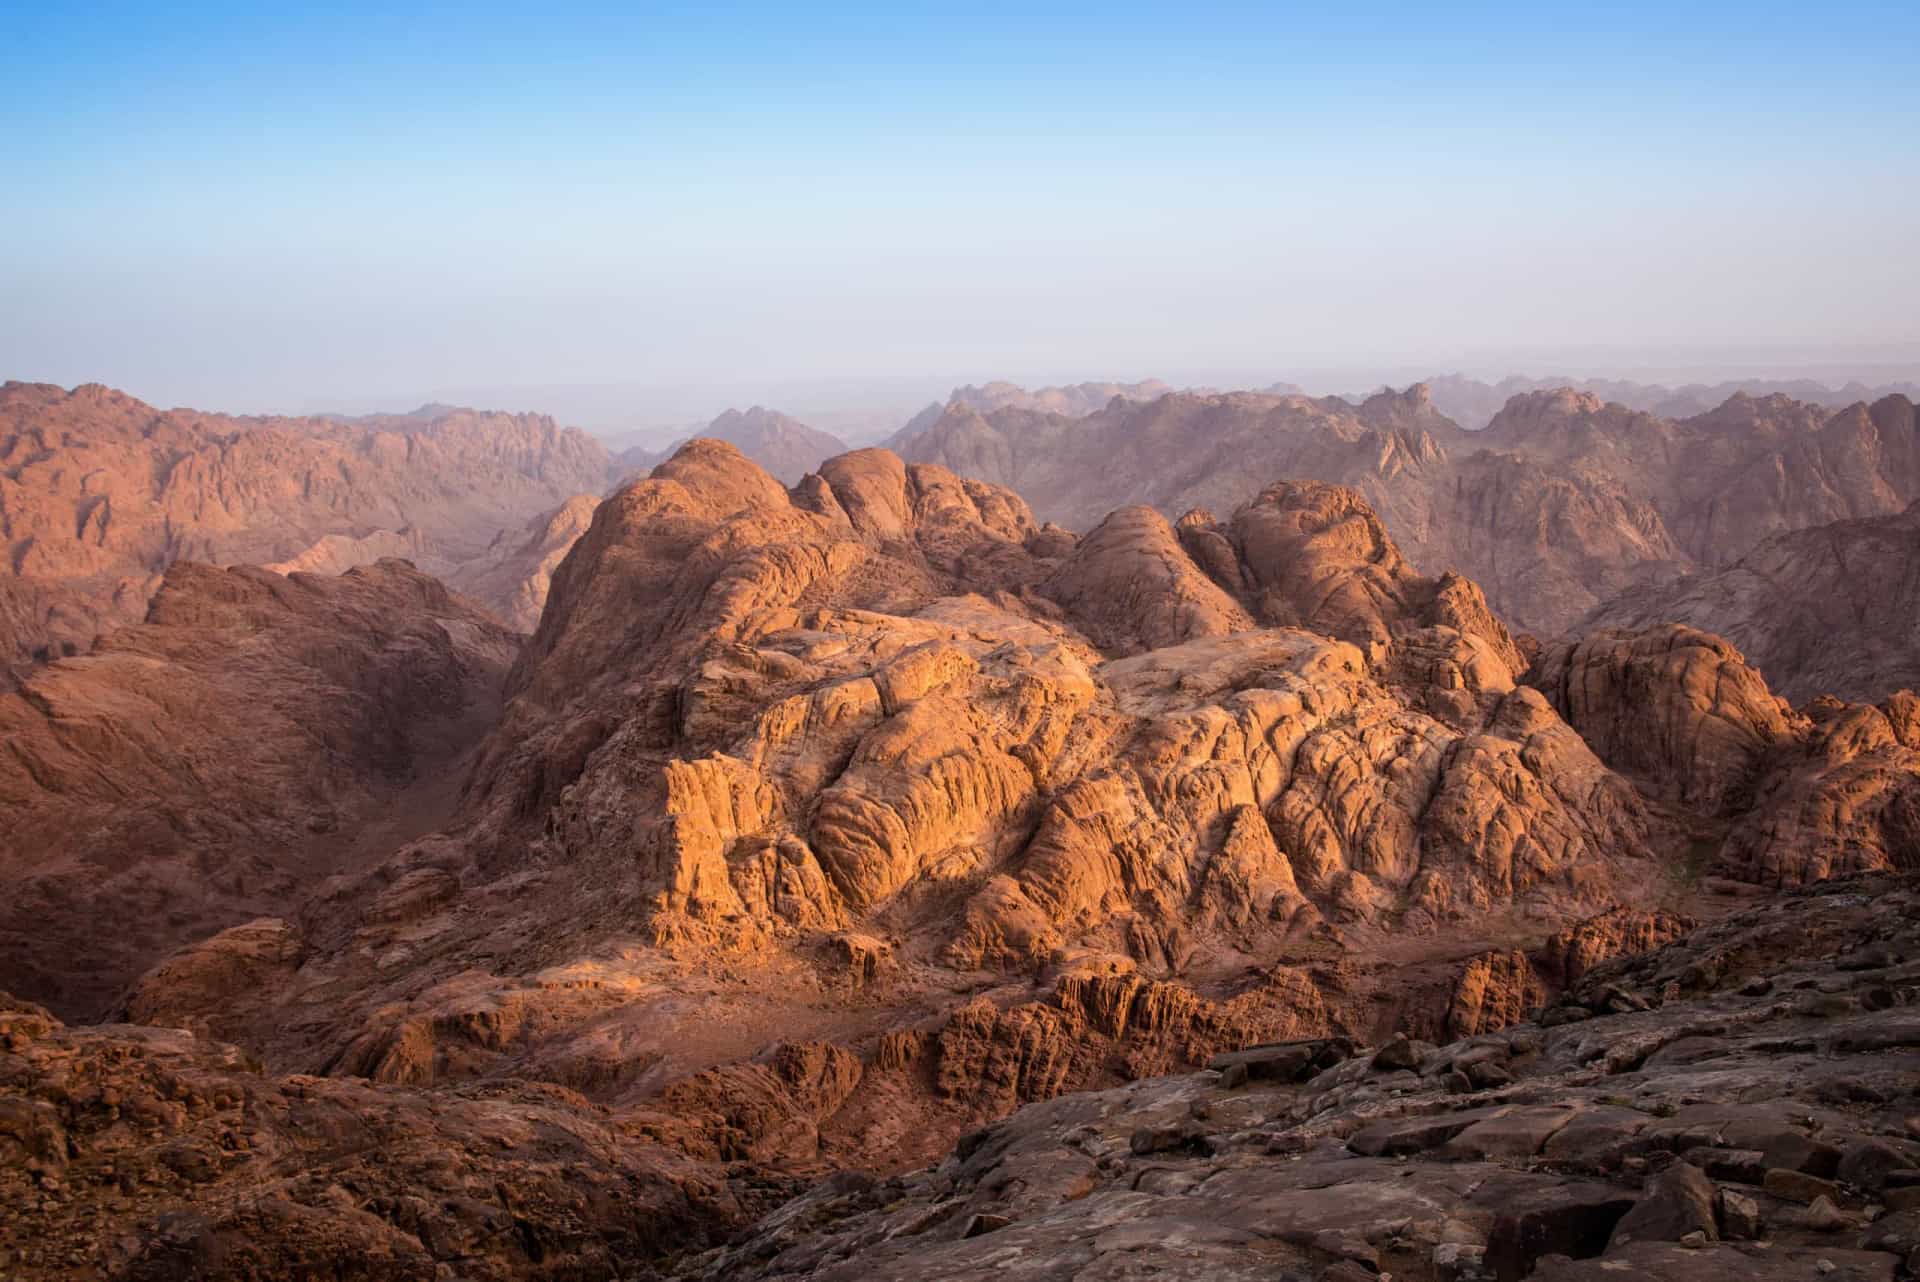 <p>Some scholars suggest that Mount Sinai on the Sinai Peninsula of Egypt is possibly the same location as the biblical Mount Sinai, the place where, according to the Bible and the Quran, Moses received the Ten Commandments.</p>